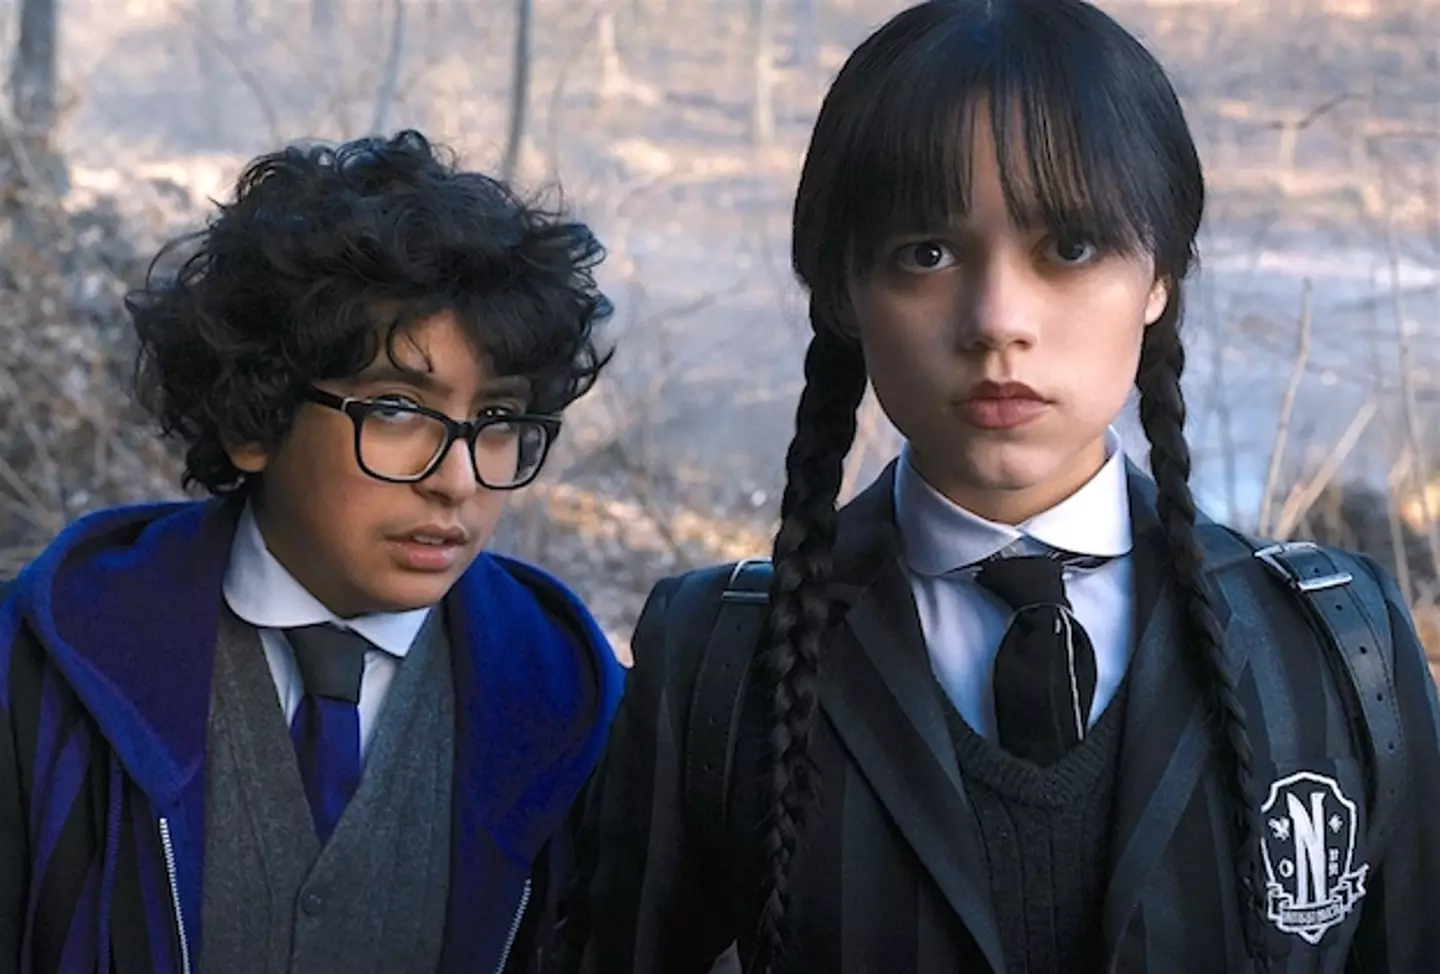 Jenna Ortega did a great job of taking over the role in Tim Burton's Wednesday series.